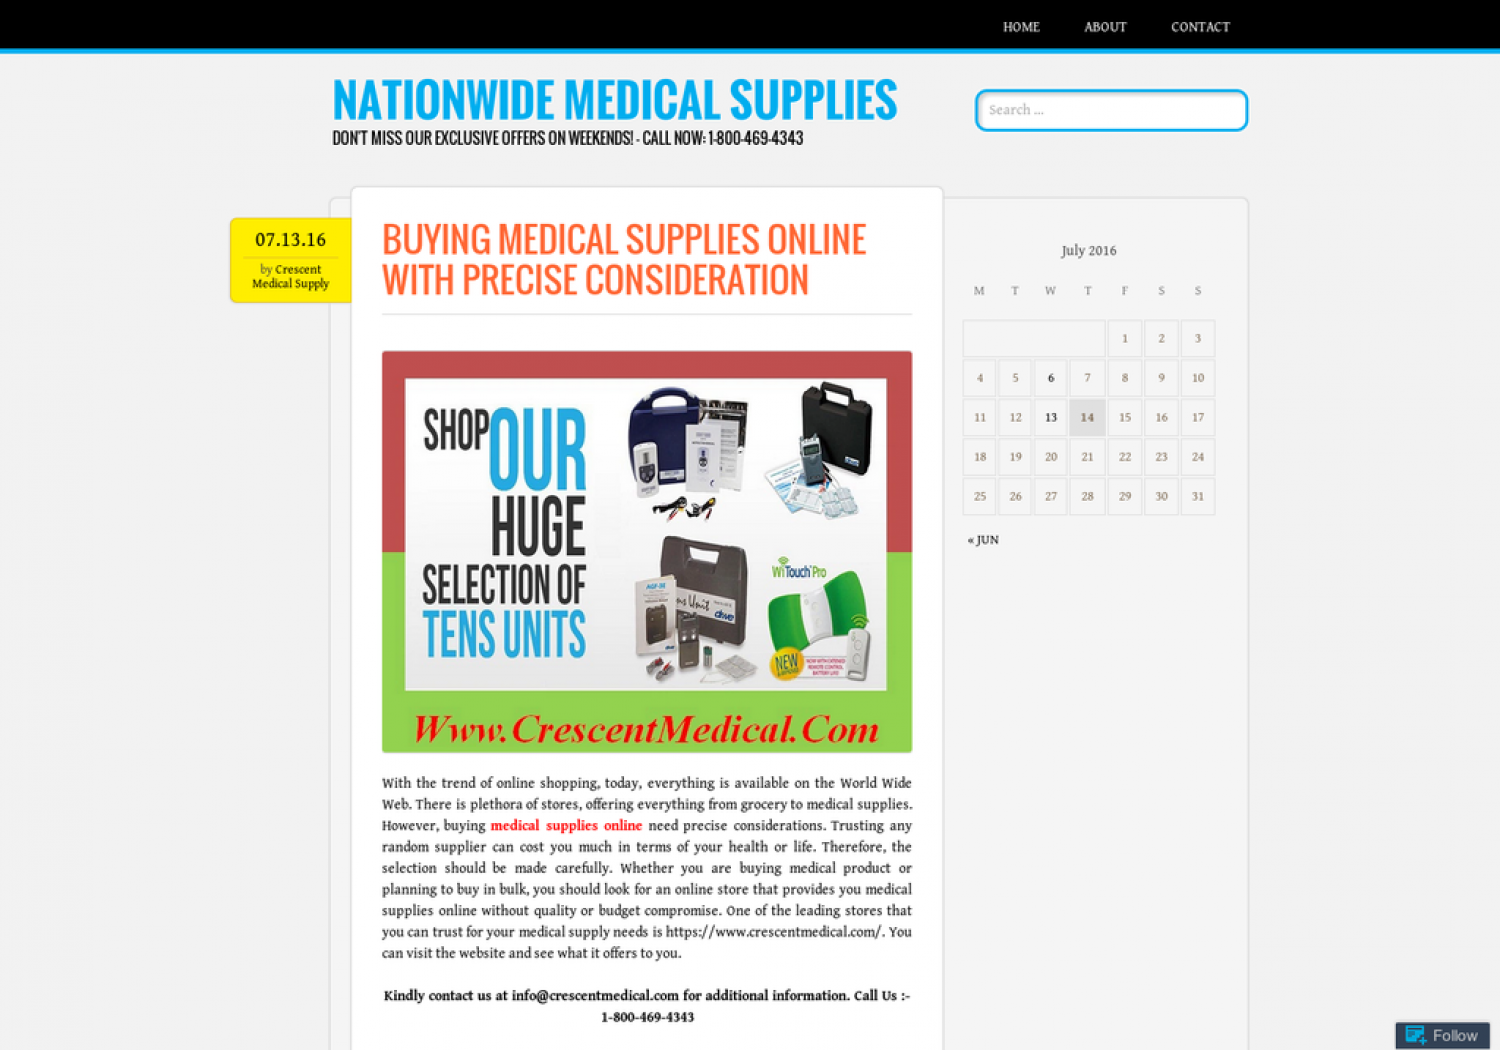 Buying Medical Supplies Online With Precise Consideration Infographic